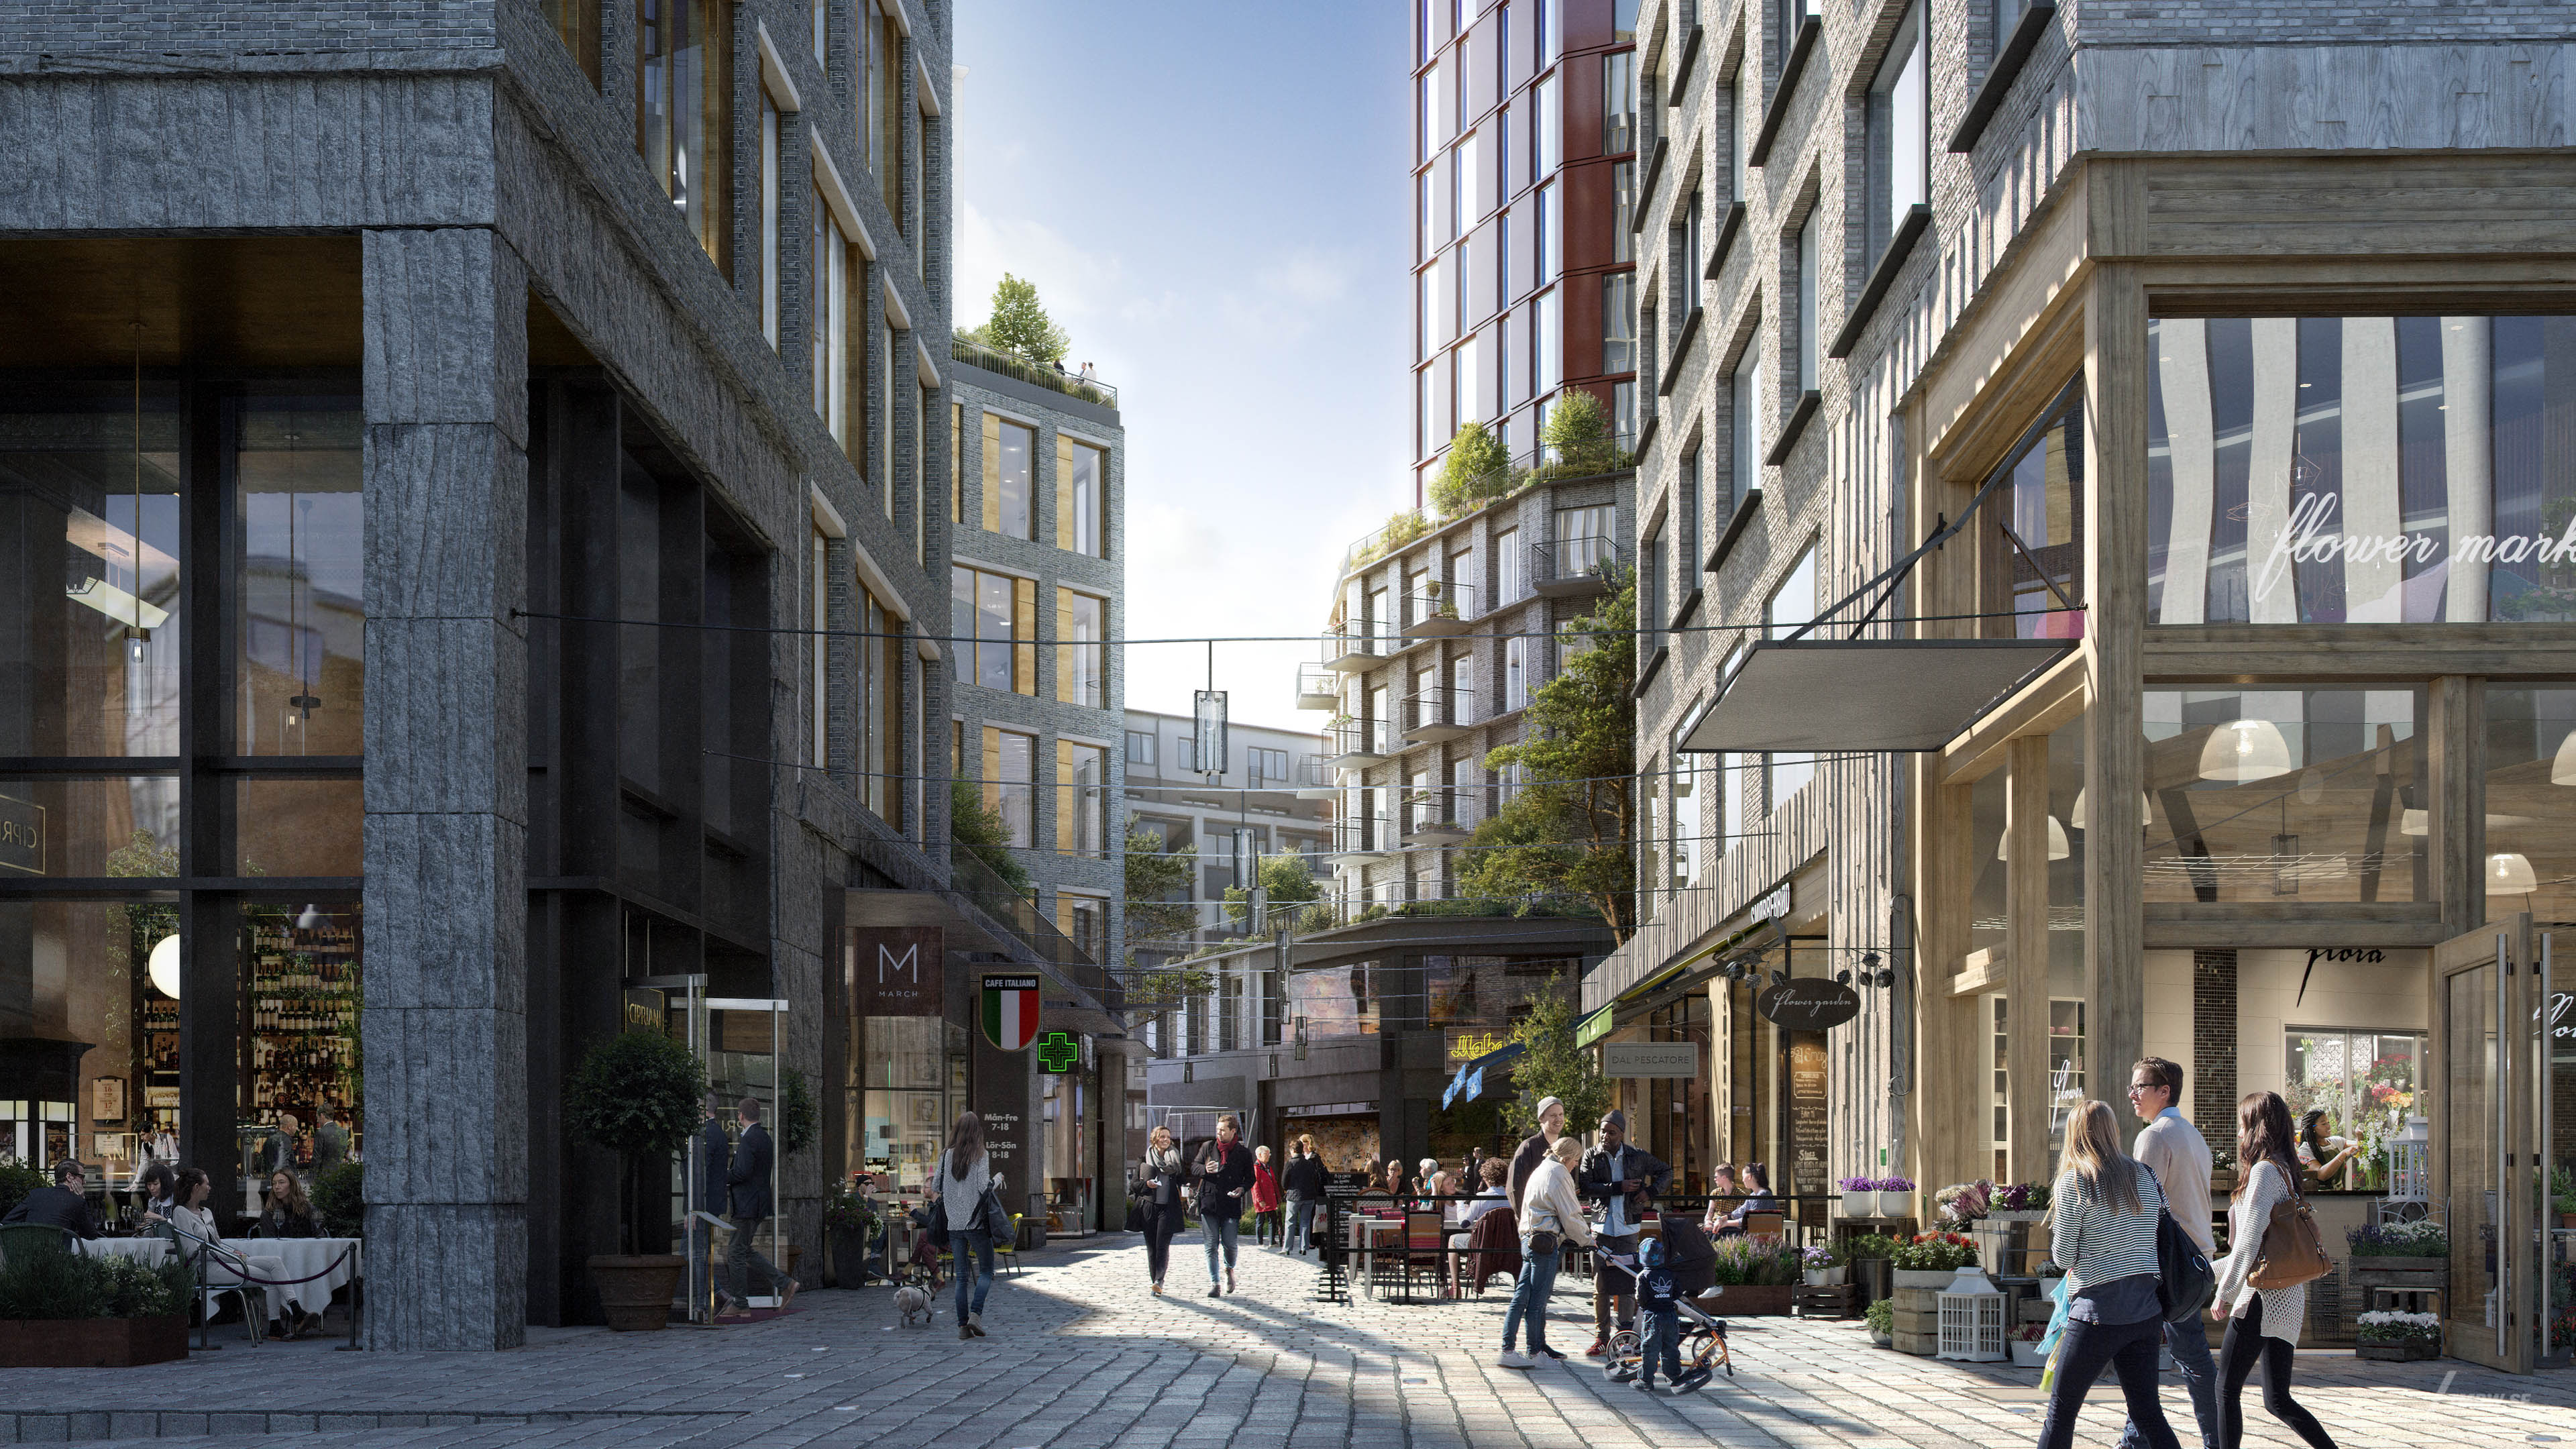 Architectural visualization of Karlastaden for Serneke a civic area in day light from a street view.